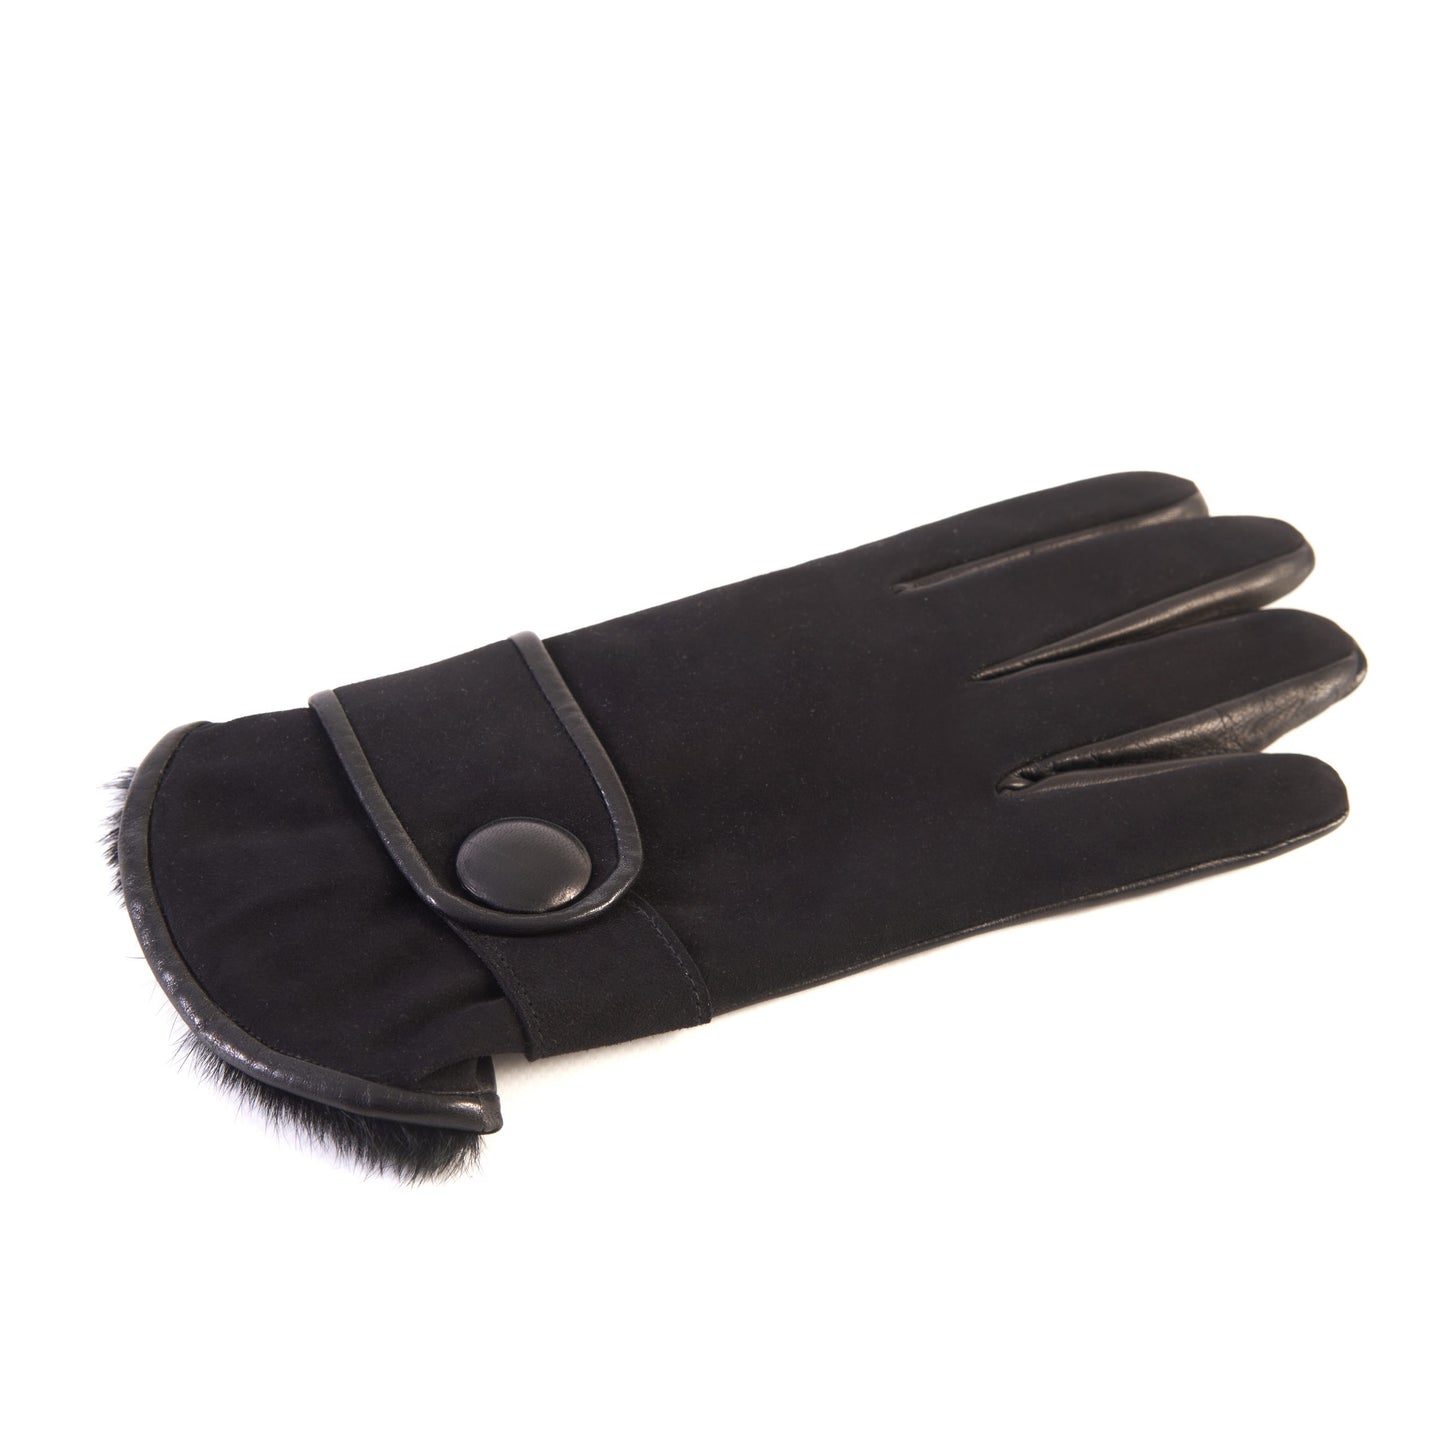 Men's black nappa and suede leather gloves with button and real fur lining